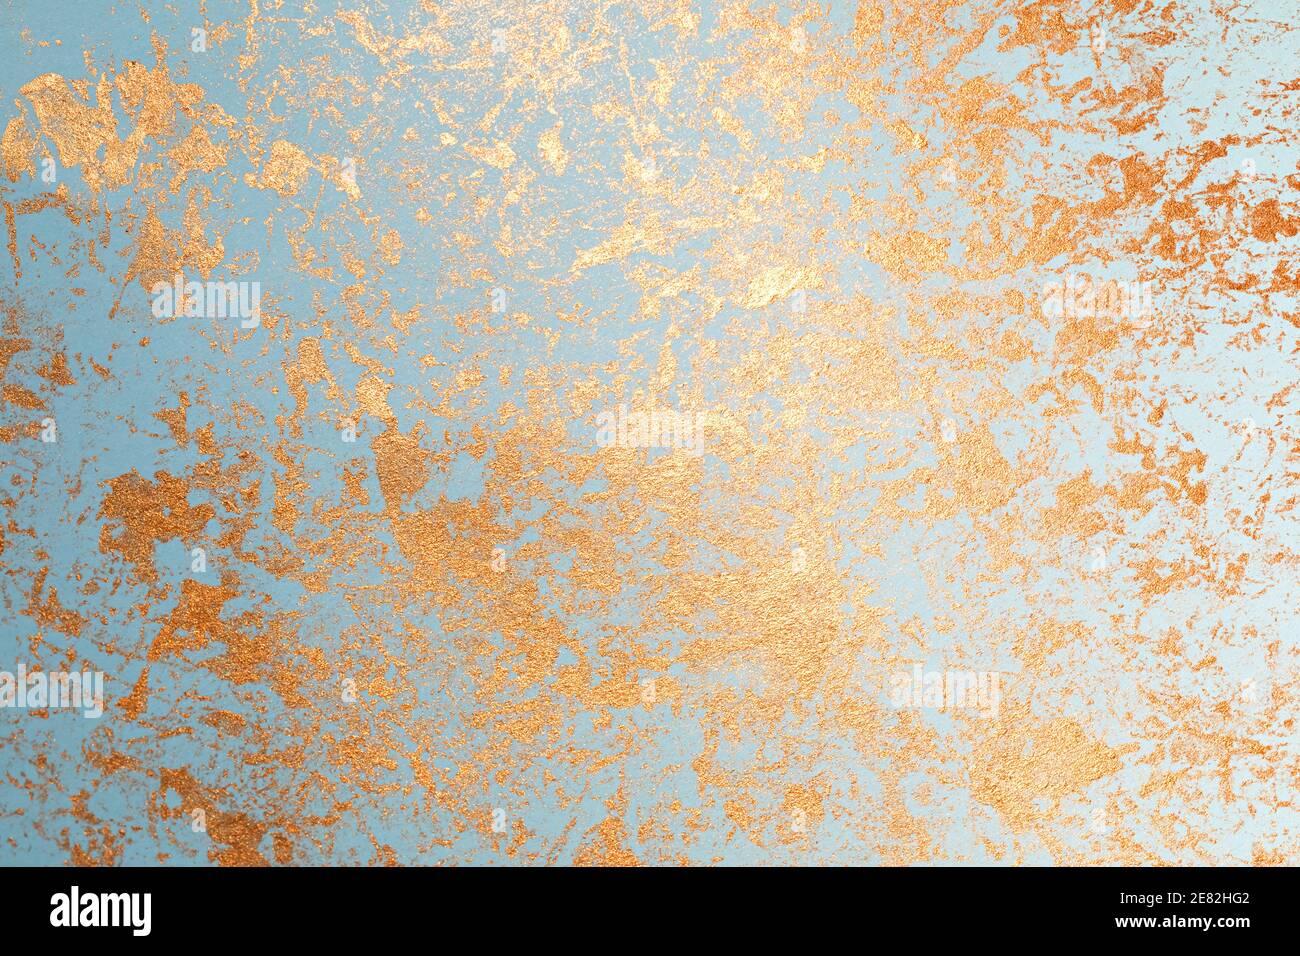 Texture of gold paint on blue paper Stock Photo